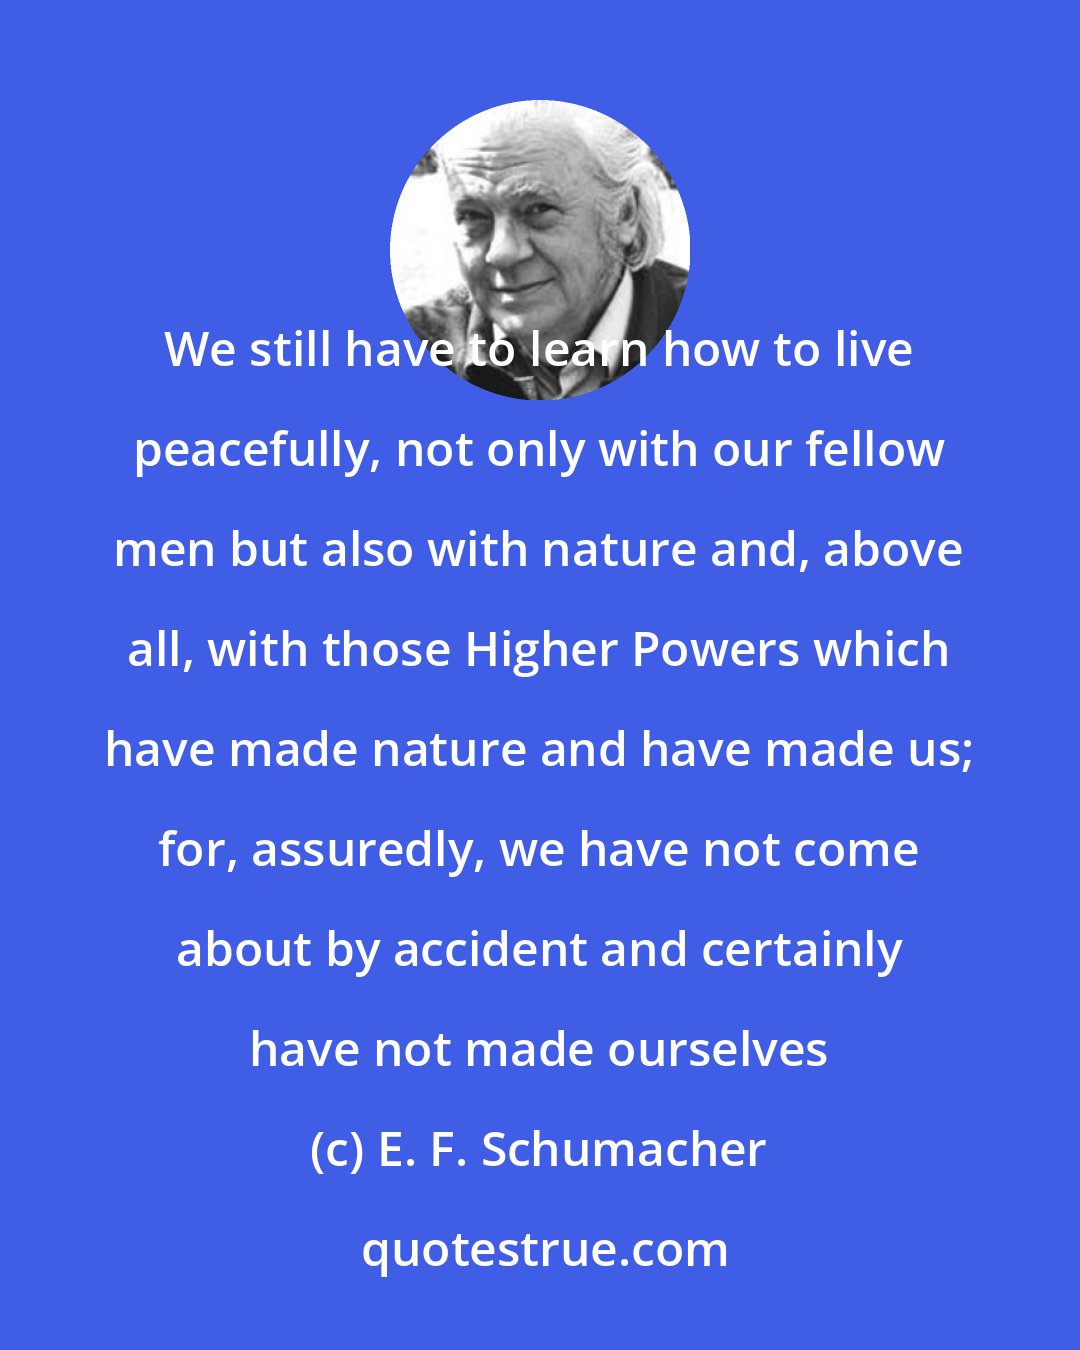 E. F. Schumacher: We still have to learn how to live peacefully, not only with our fellow men but also with nature and, above all, with those Higher Powers which have made nature and have made us; for, assuredly, we have not come about by accident and certainly have not made ourselves